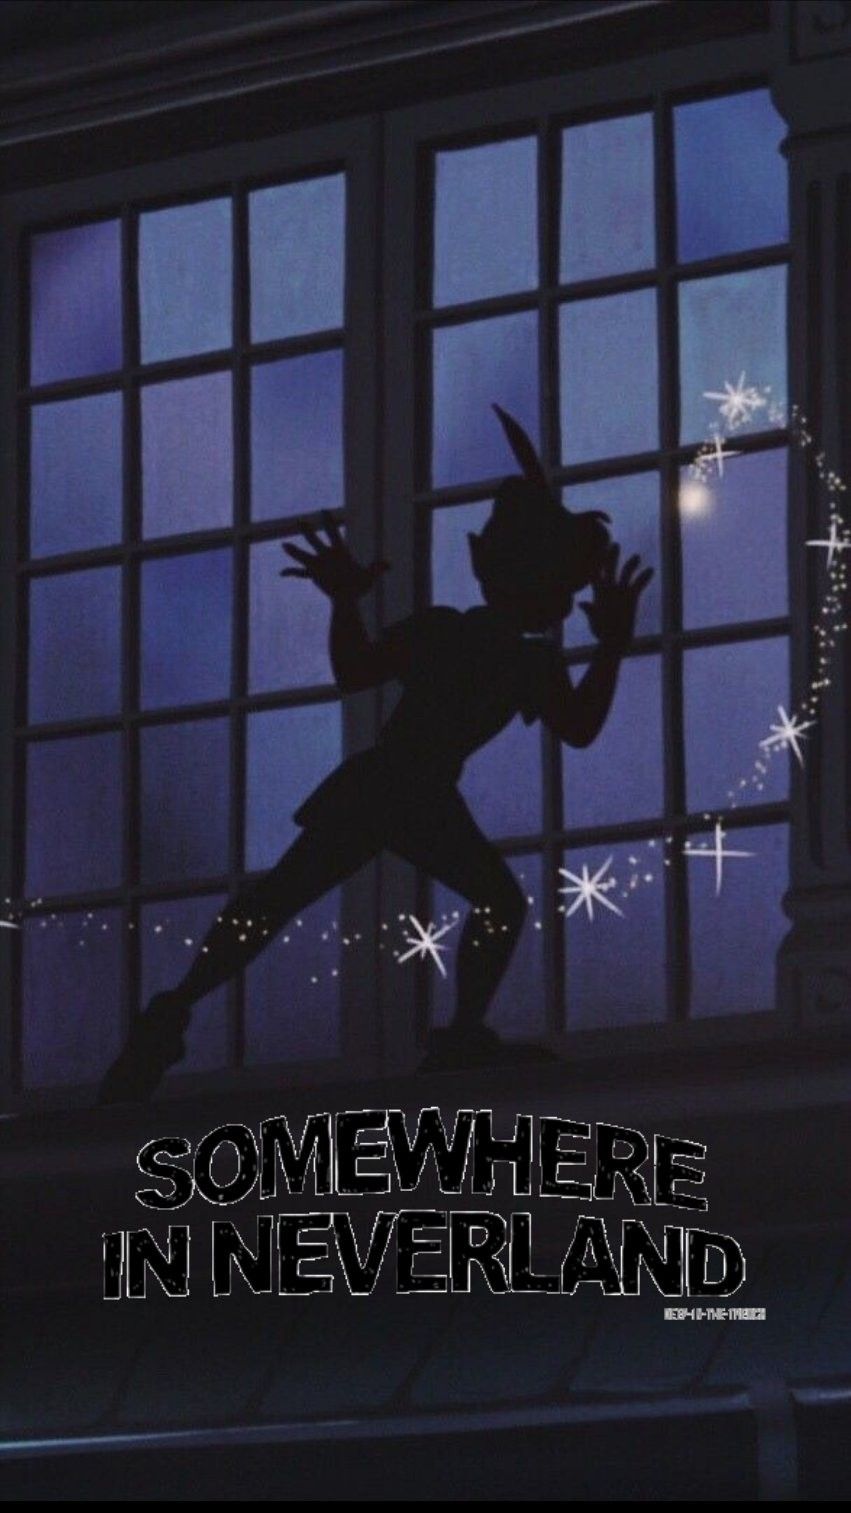 Peter Pan Iphone Background